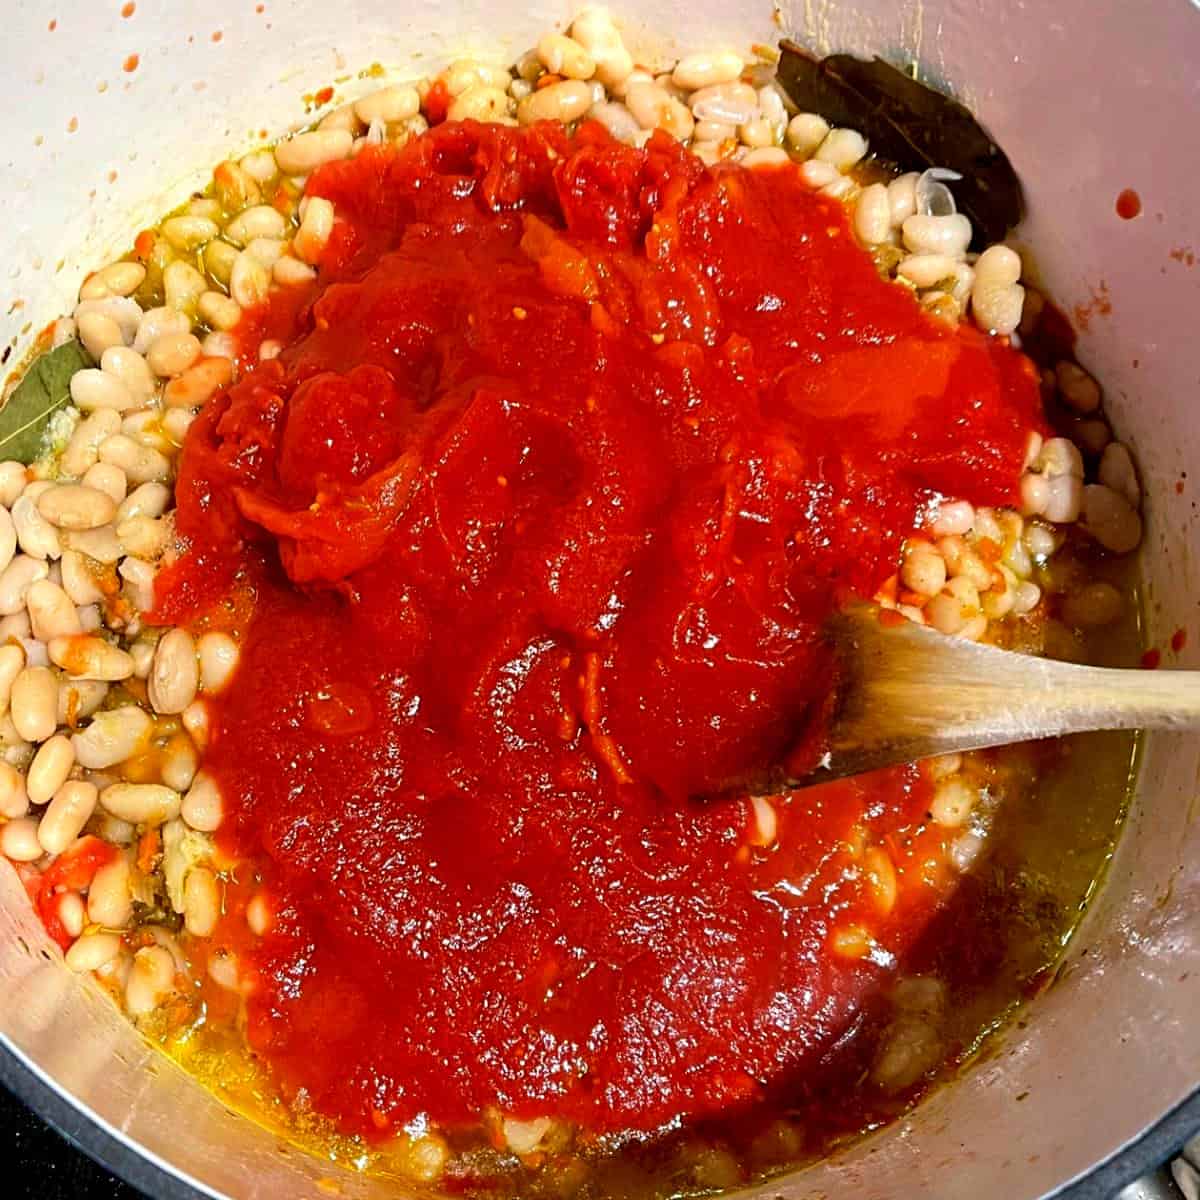 Tomatoes added to pot with beans.